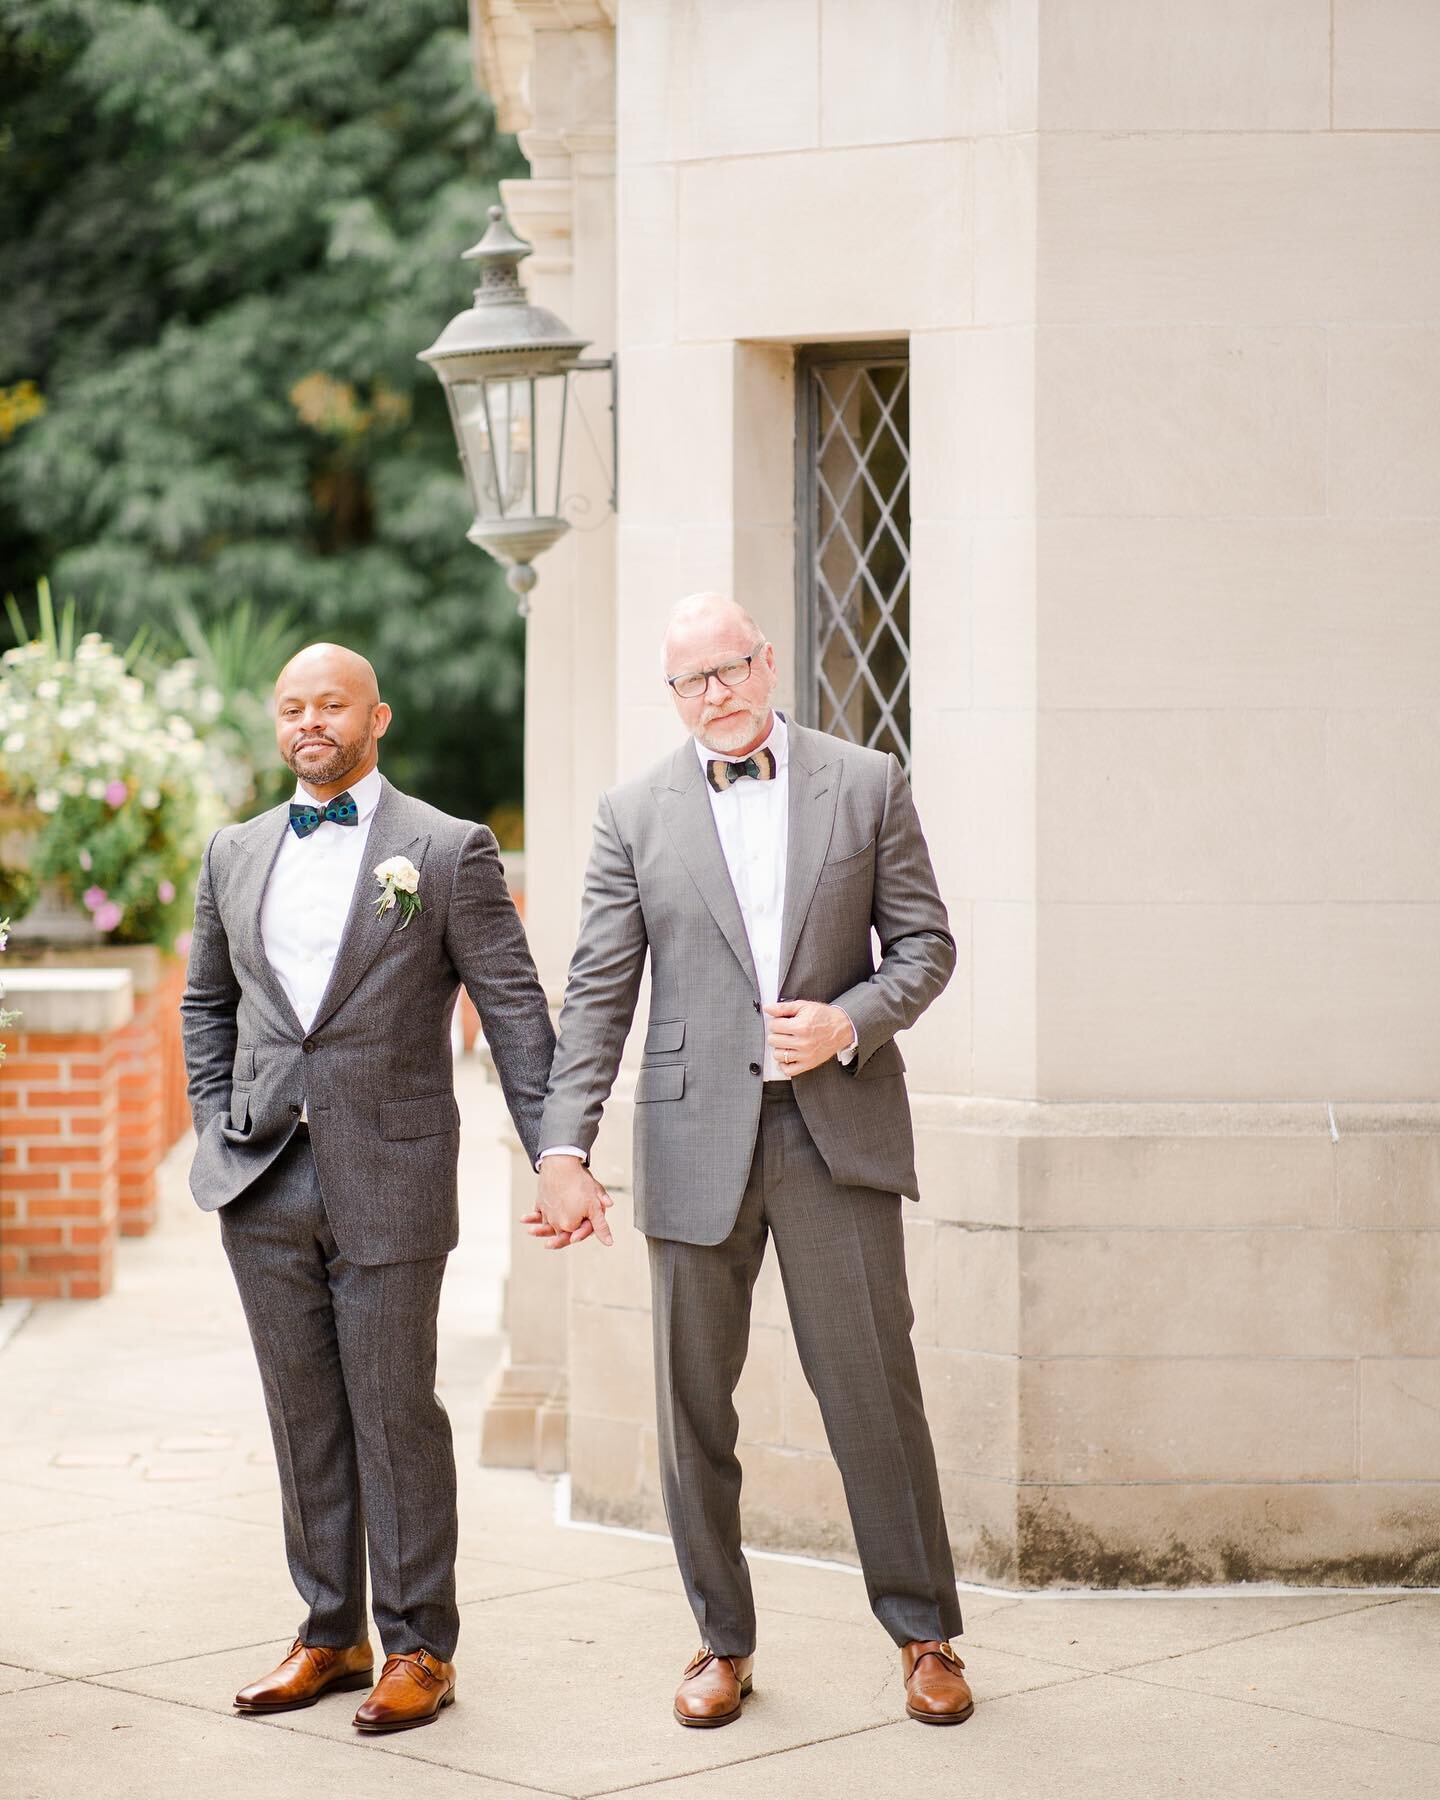 We have another snow day here in Ohio and I&rsquo;ve officially reached the, &ldquo;I&rsquo;m over it&rdquo; stage of winter and will just be scrolling through past summer weddings like Clifton and Christian&rsquo;s  to get me through. 🤩 These two l